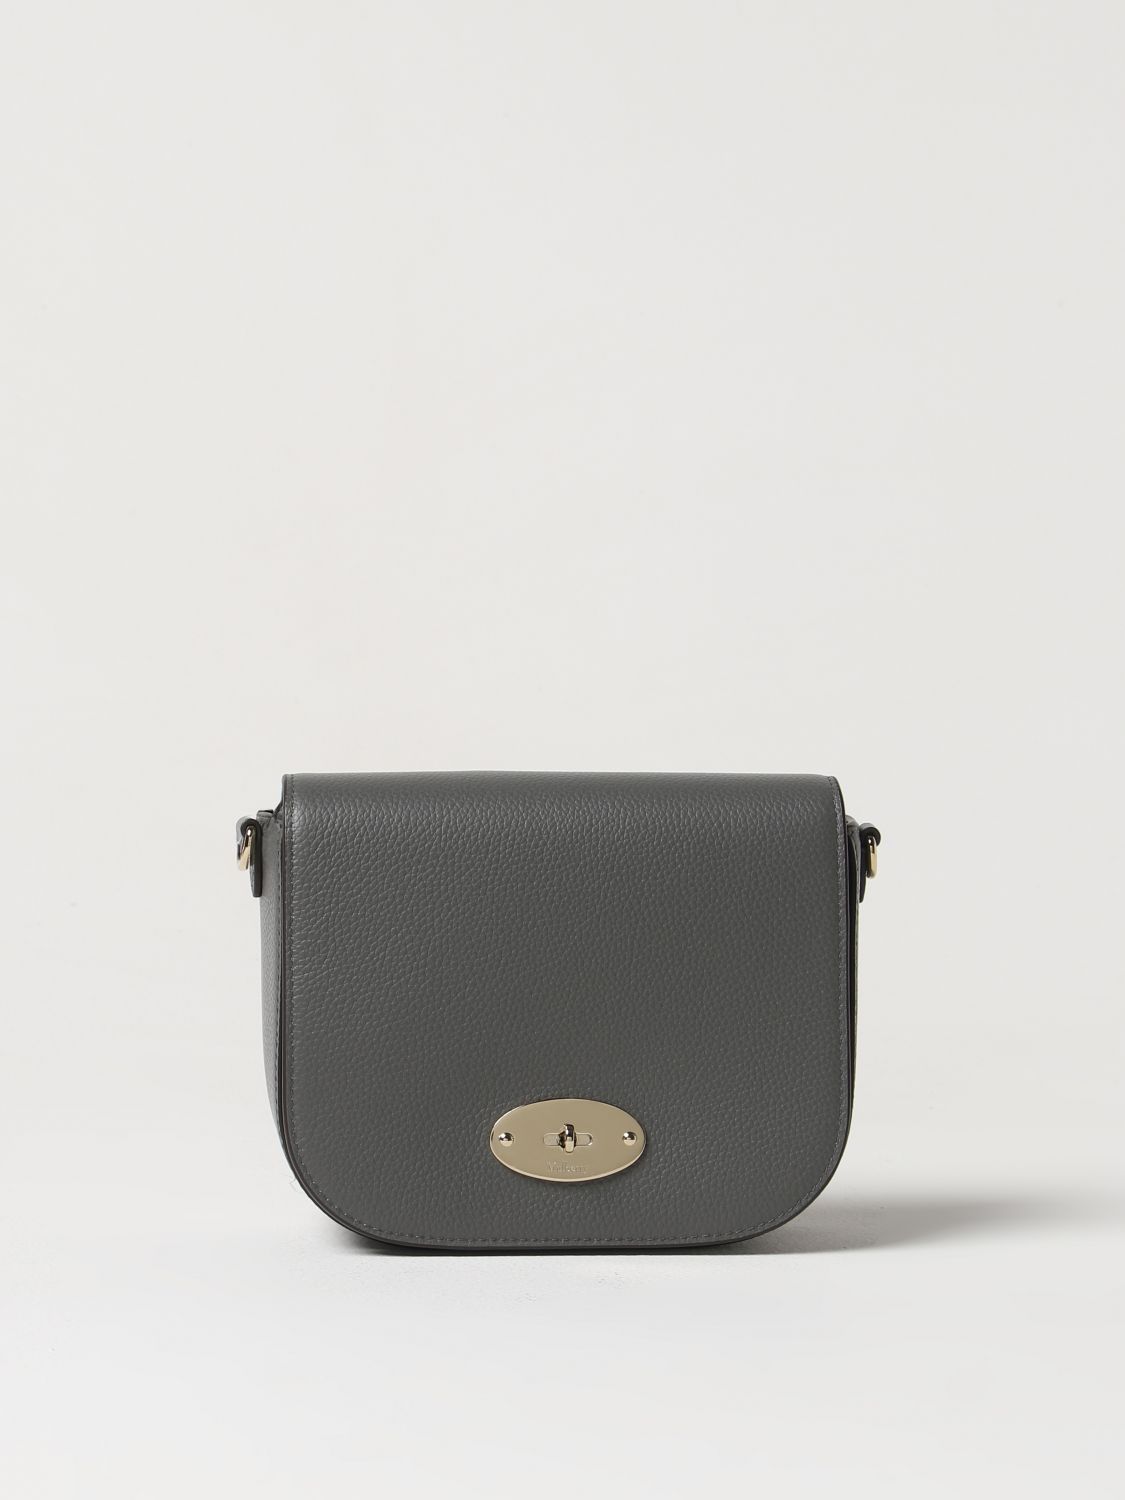 Mulberry Mini Bag MULBERRY Woman colour Grey